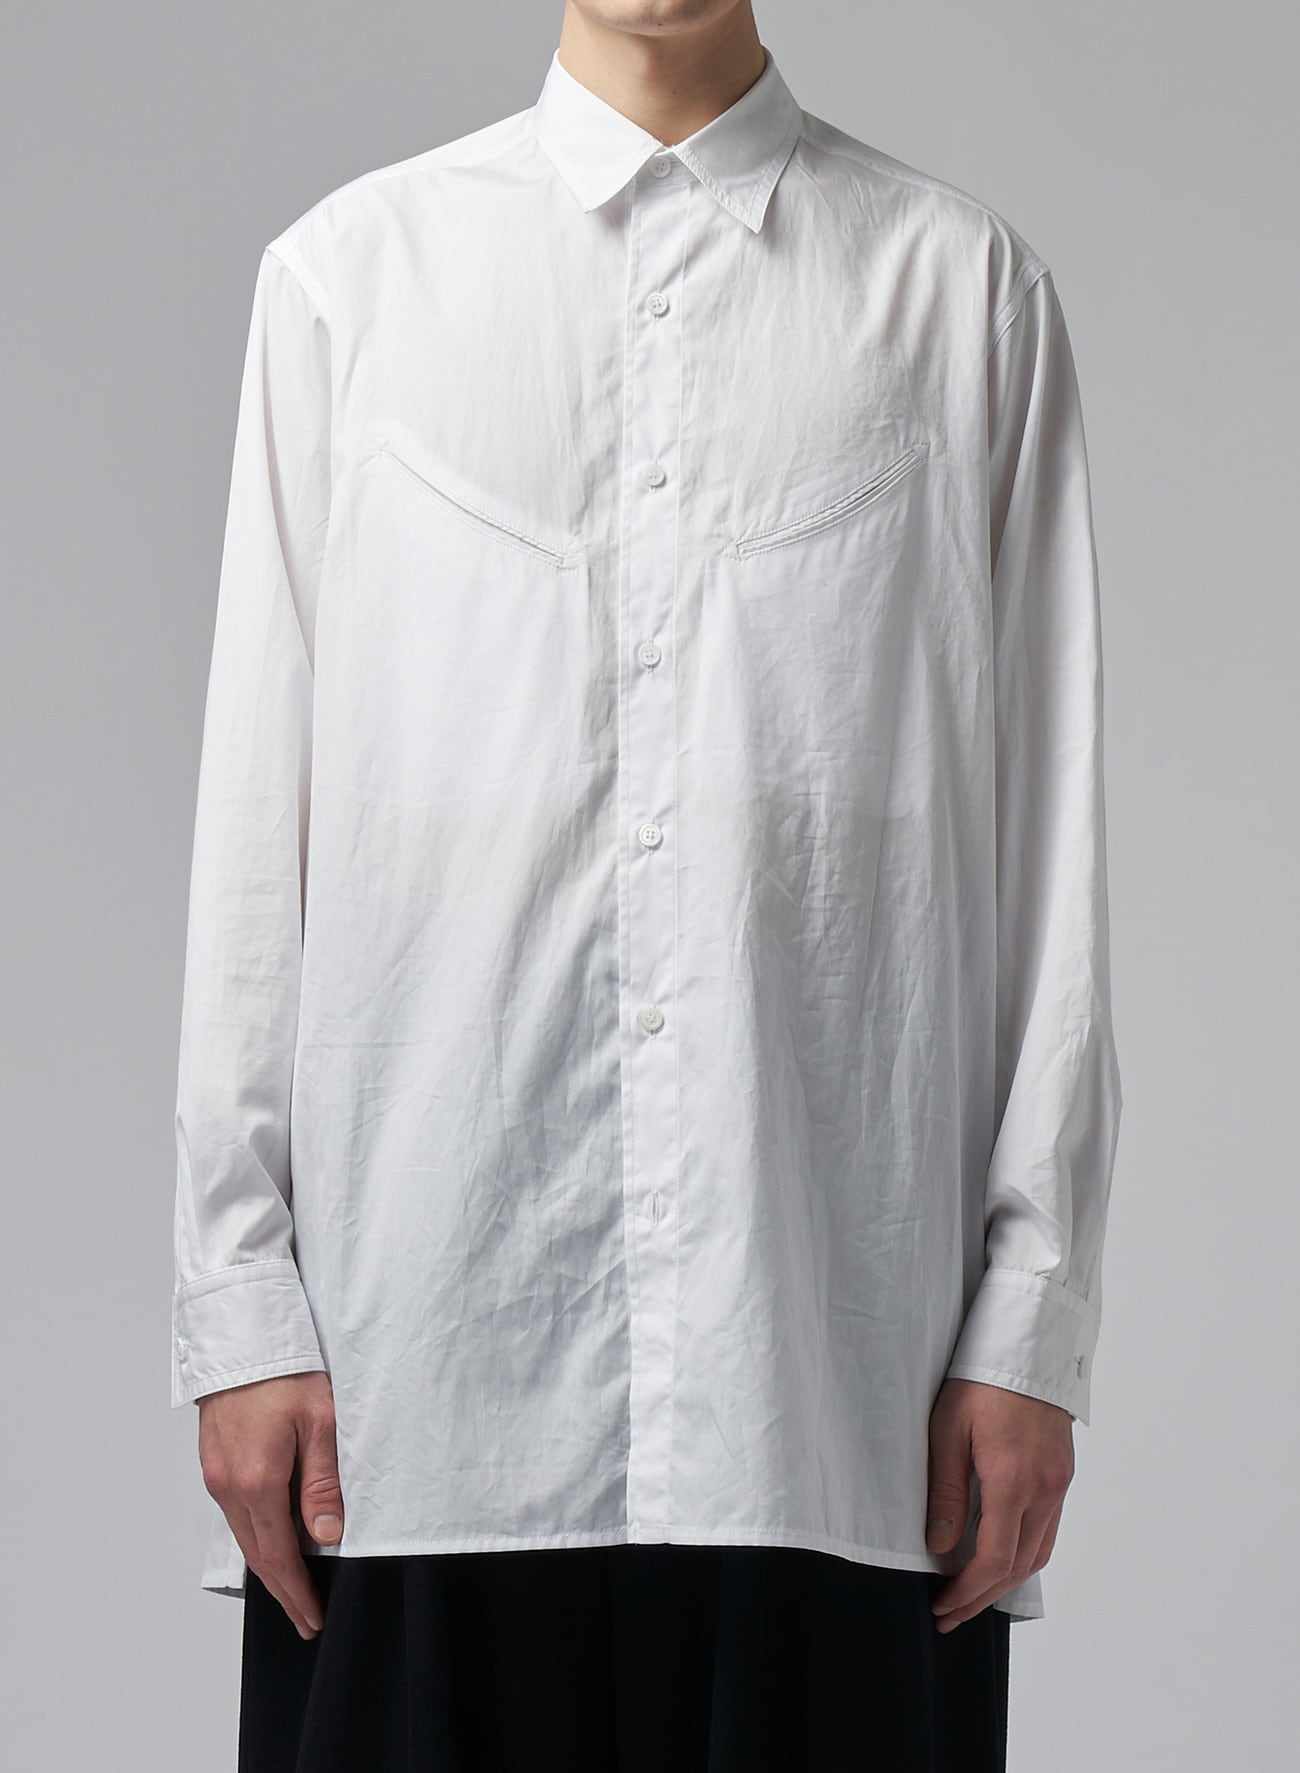 SHIRT WITH SLANTED CHEST POCKETS(S White): Vintage｜THE SHOP YOHJI 